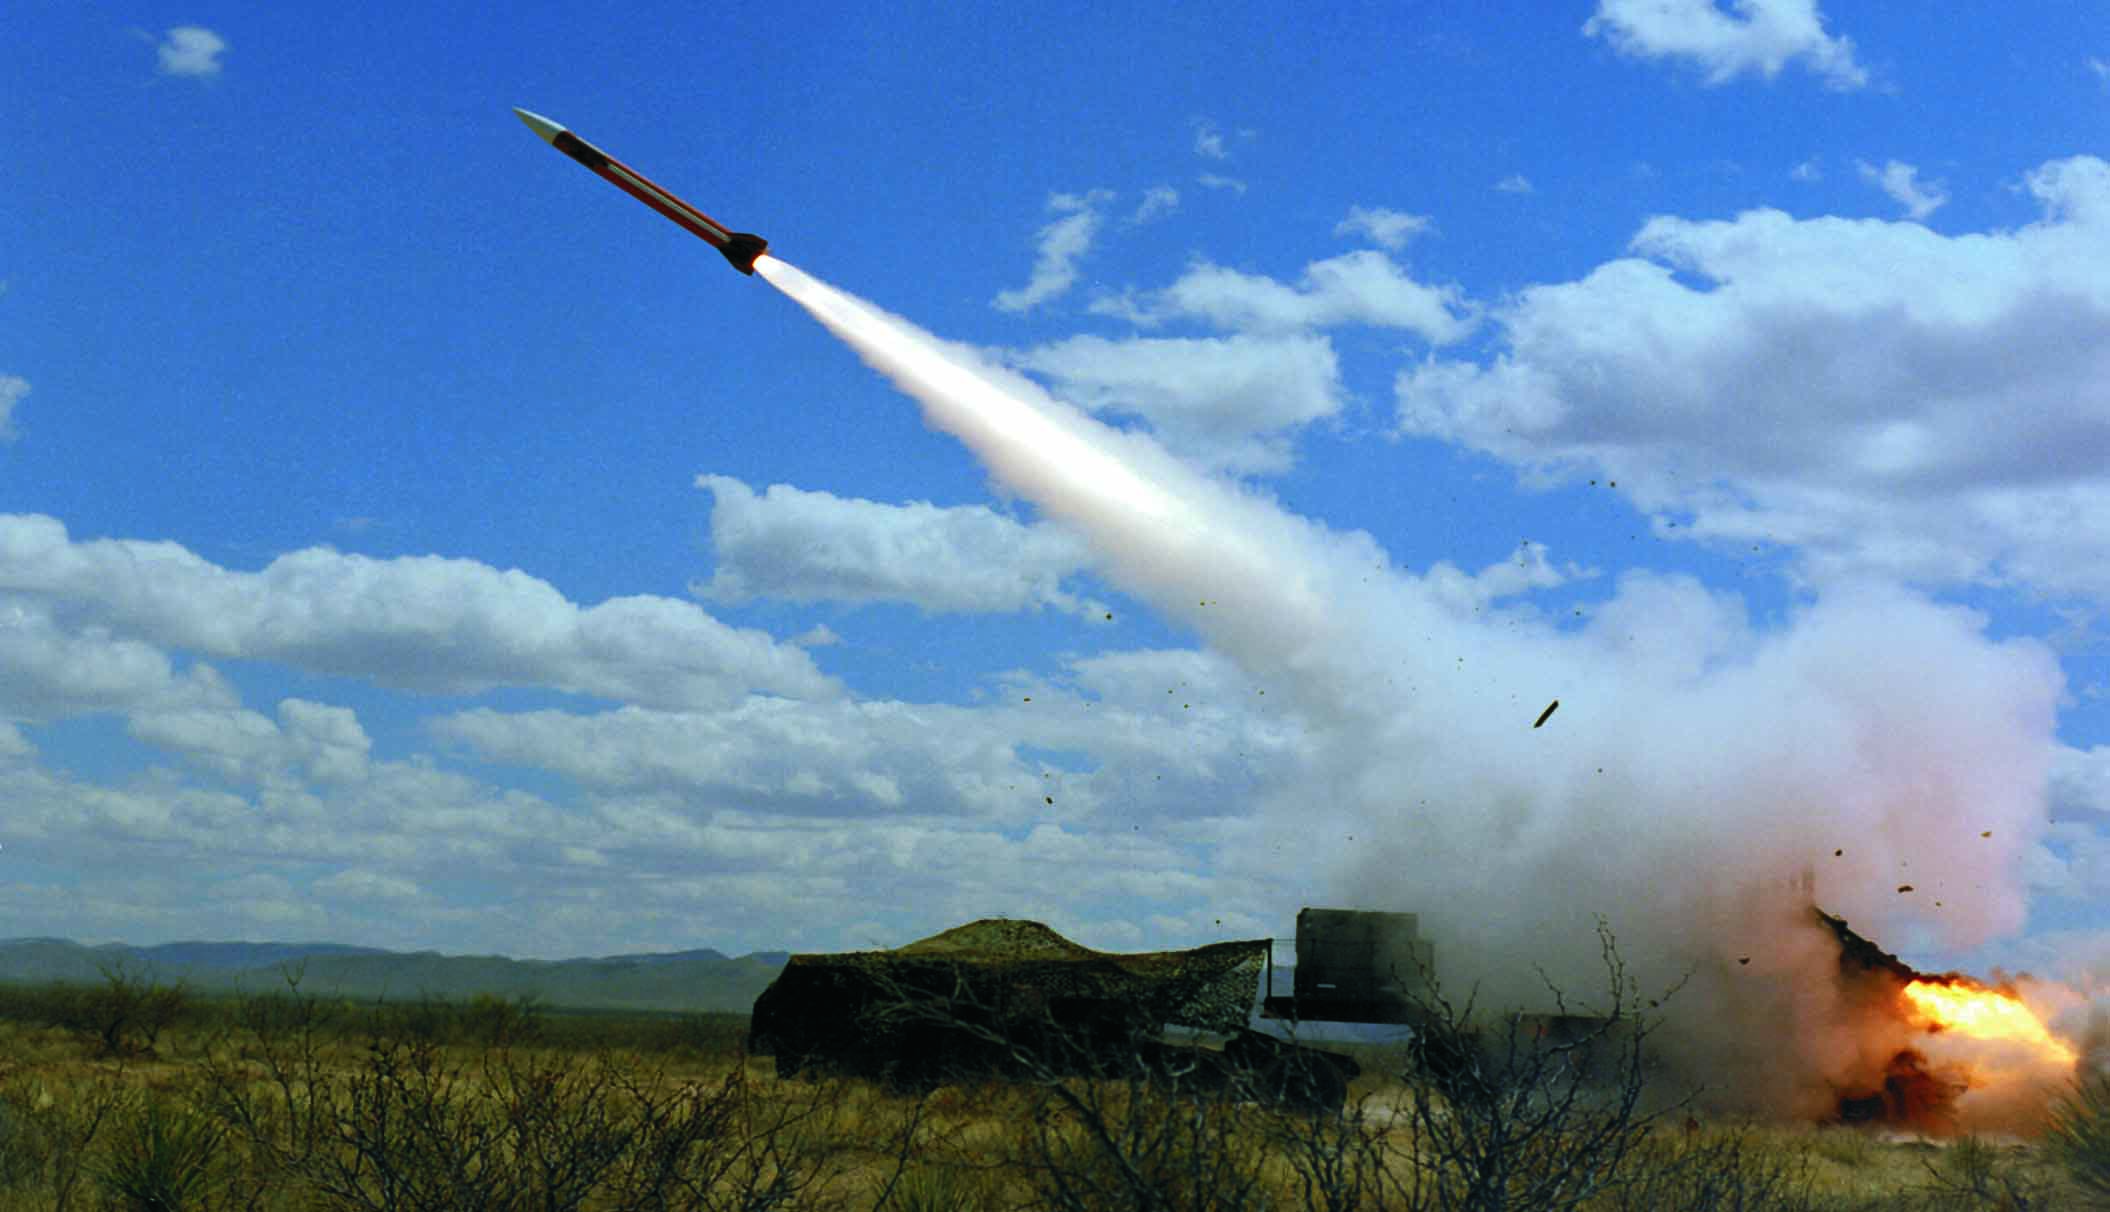 The Air Force Once Flirted With Basing New ICBMs in Lakes, Tunnels